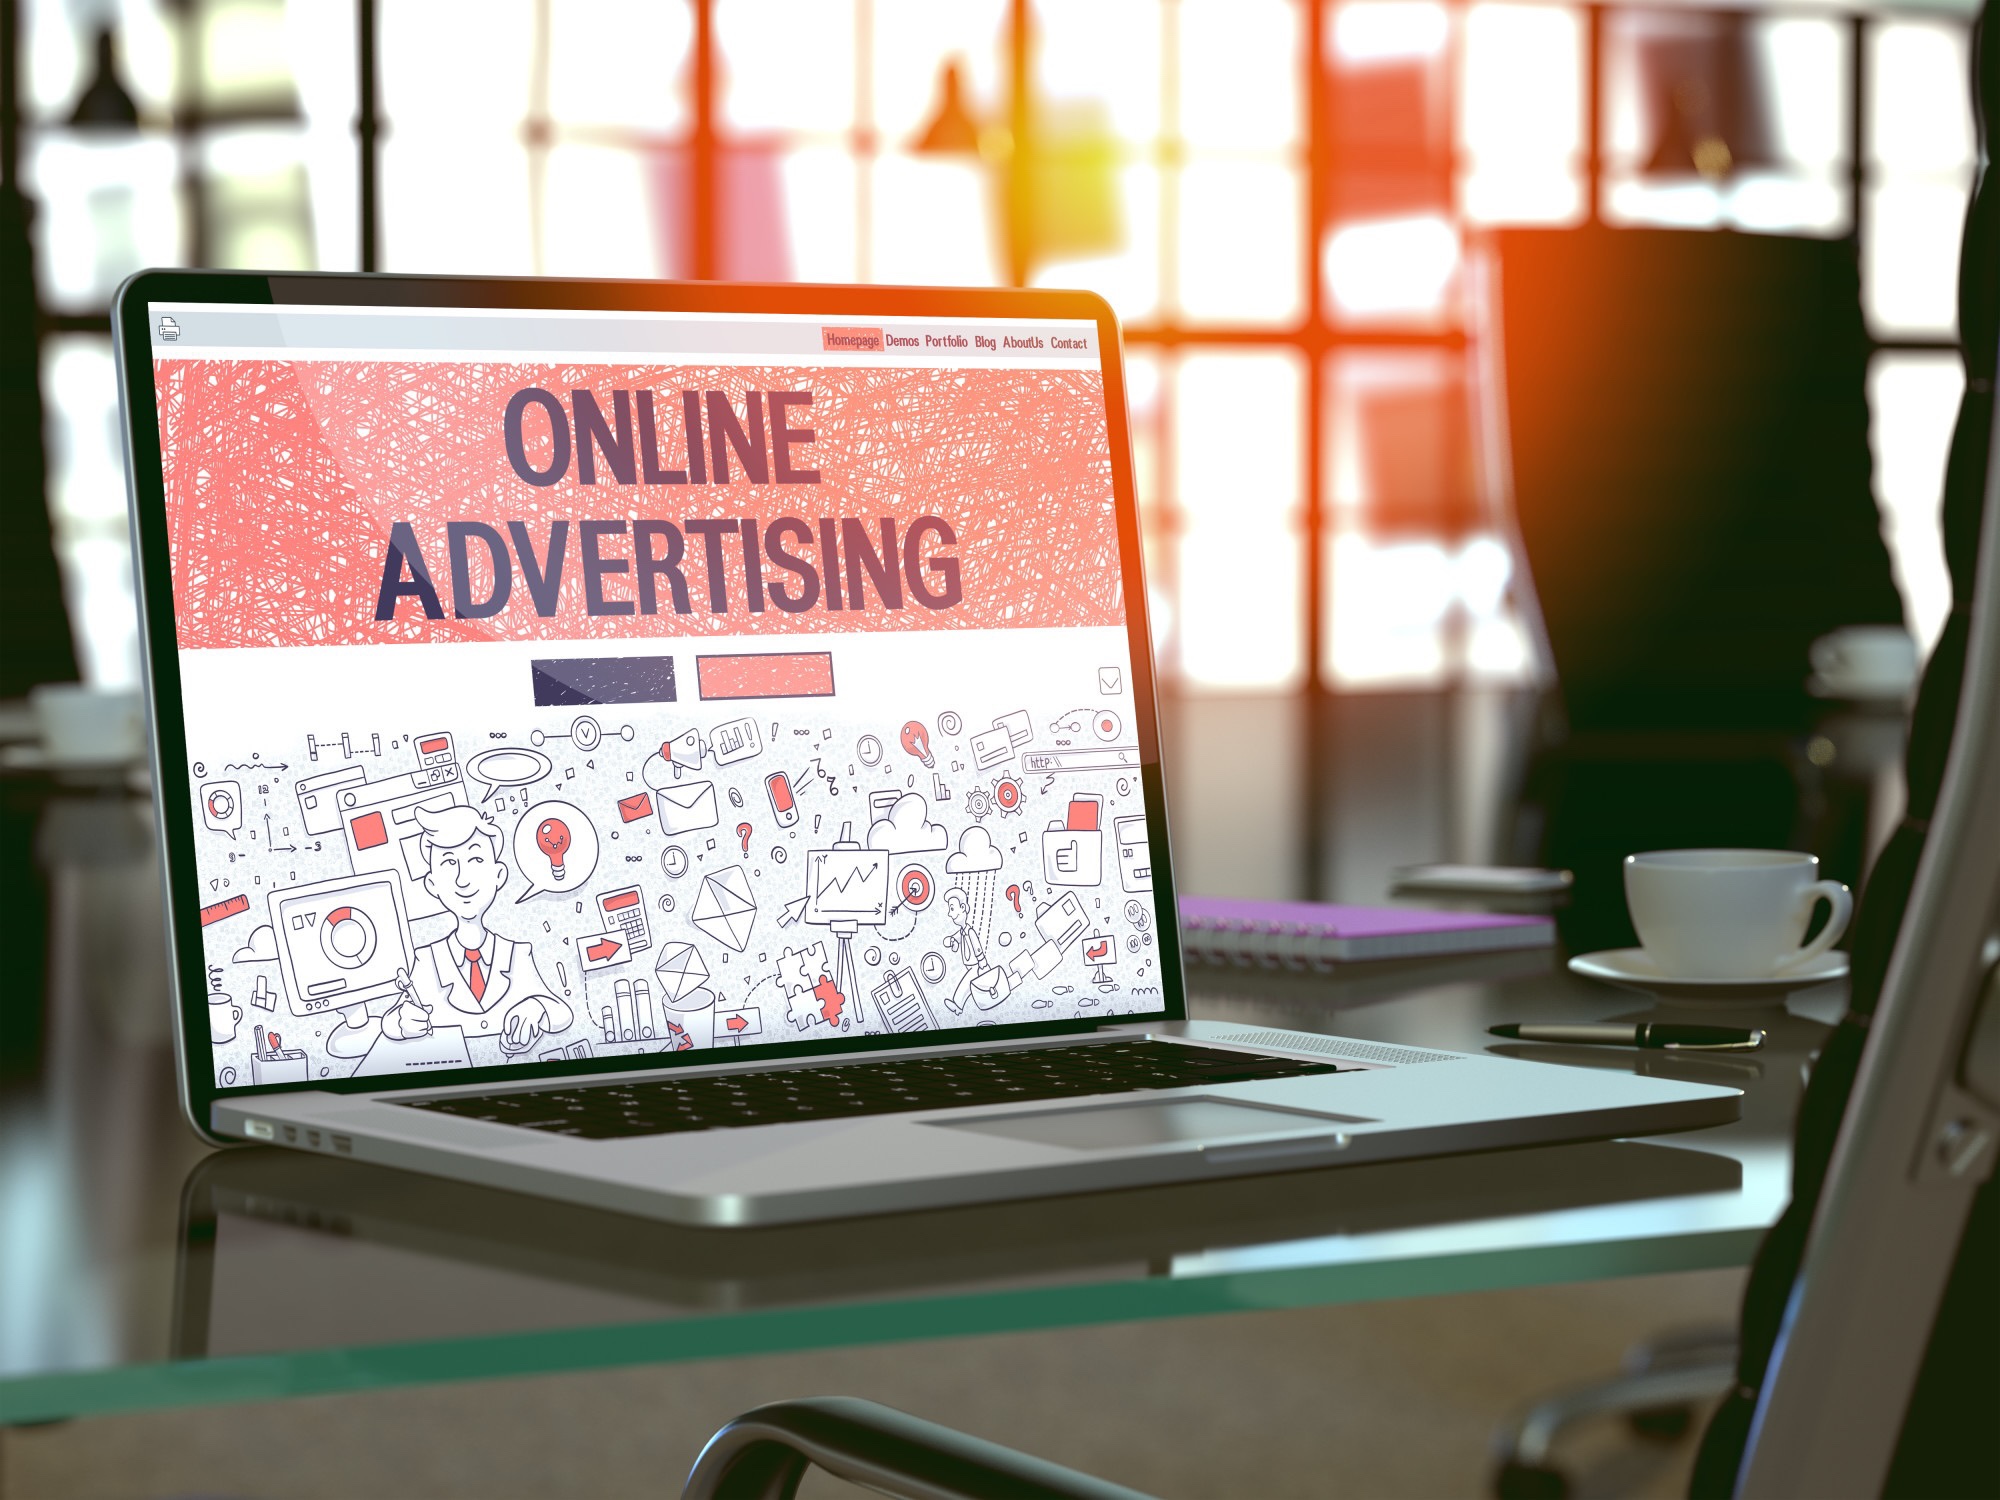 5 Big Ways to Advertise Your Business Online - Erica R. Buteau